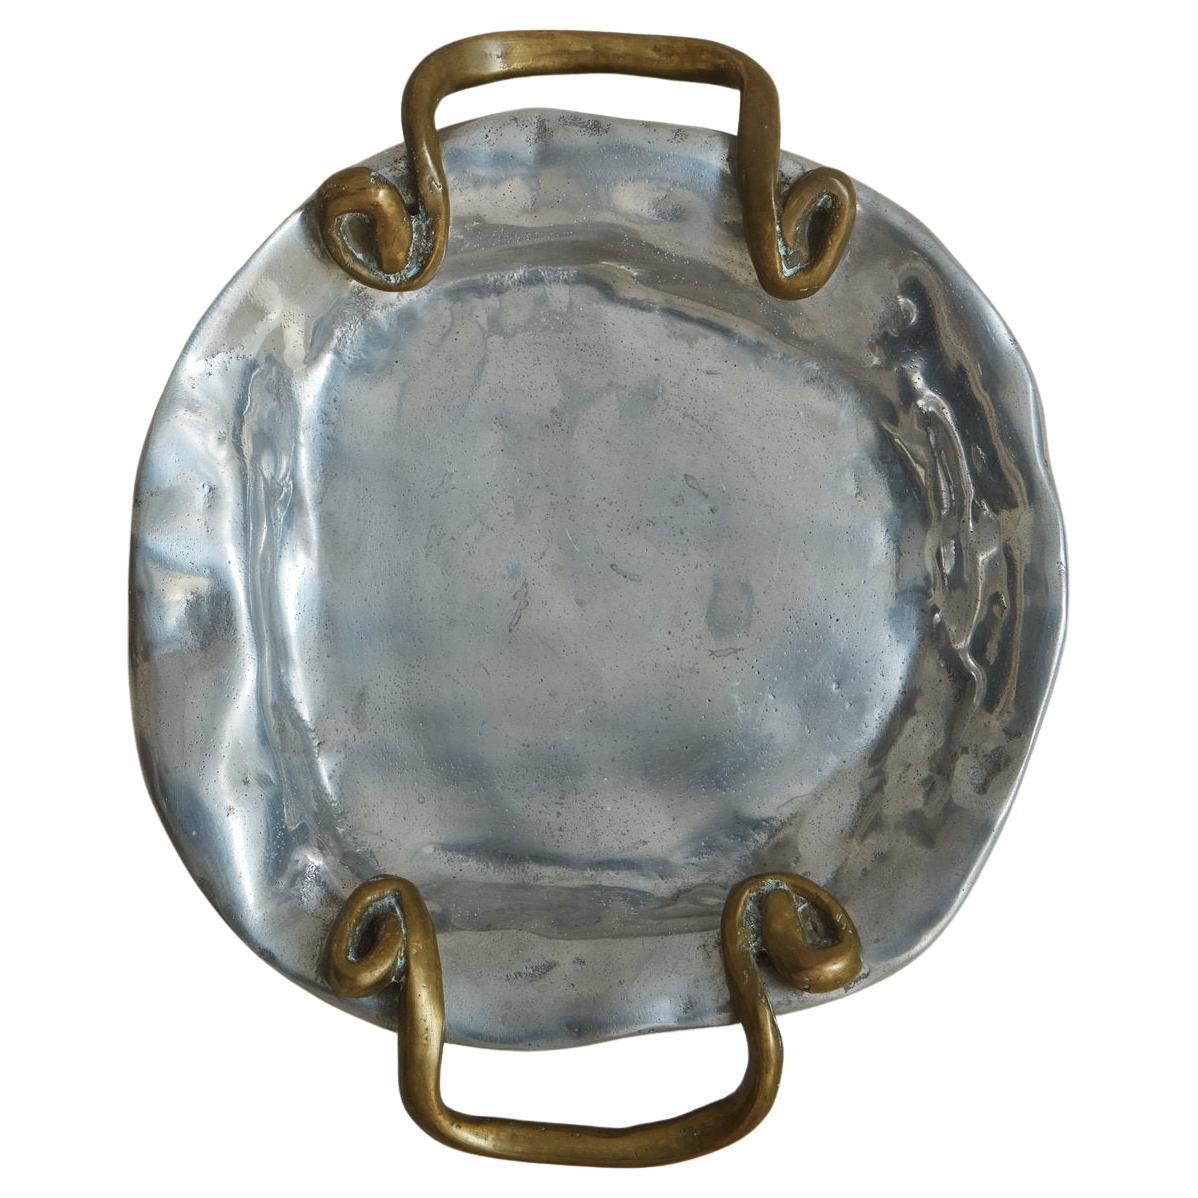 Aluminum + Brass Round Tray with Curved Handles by David Marshall, Spain, 1980s